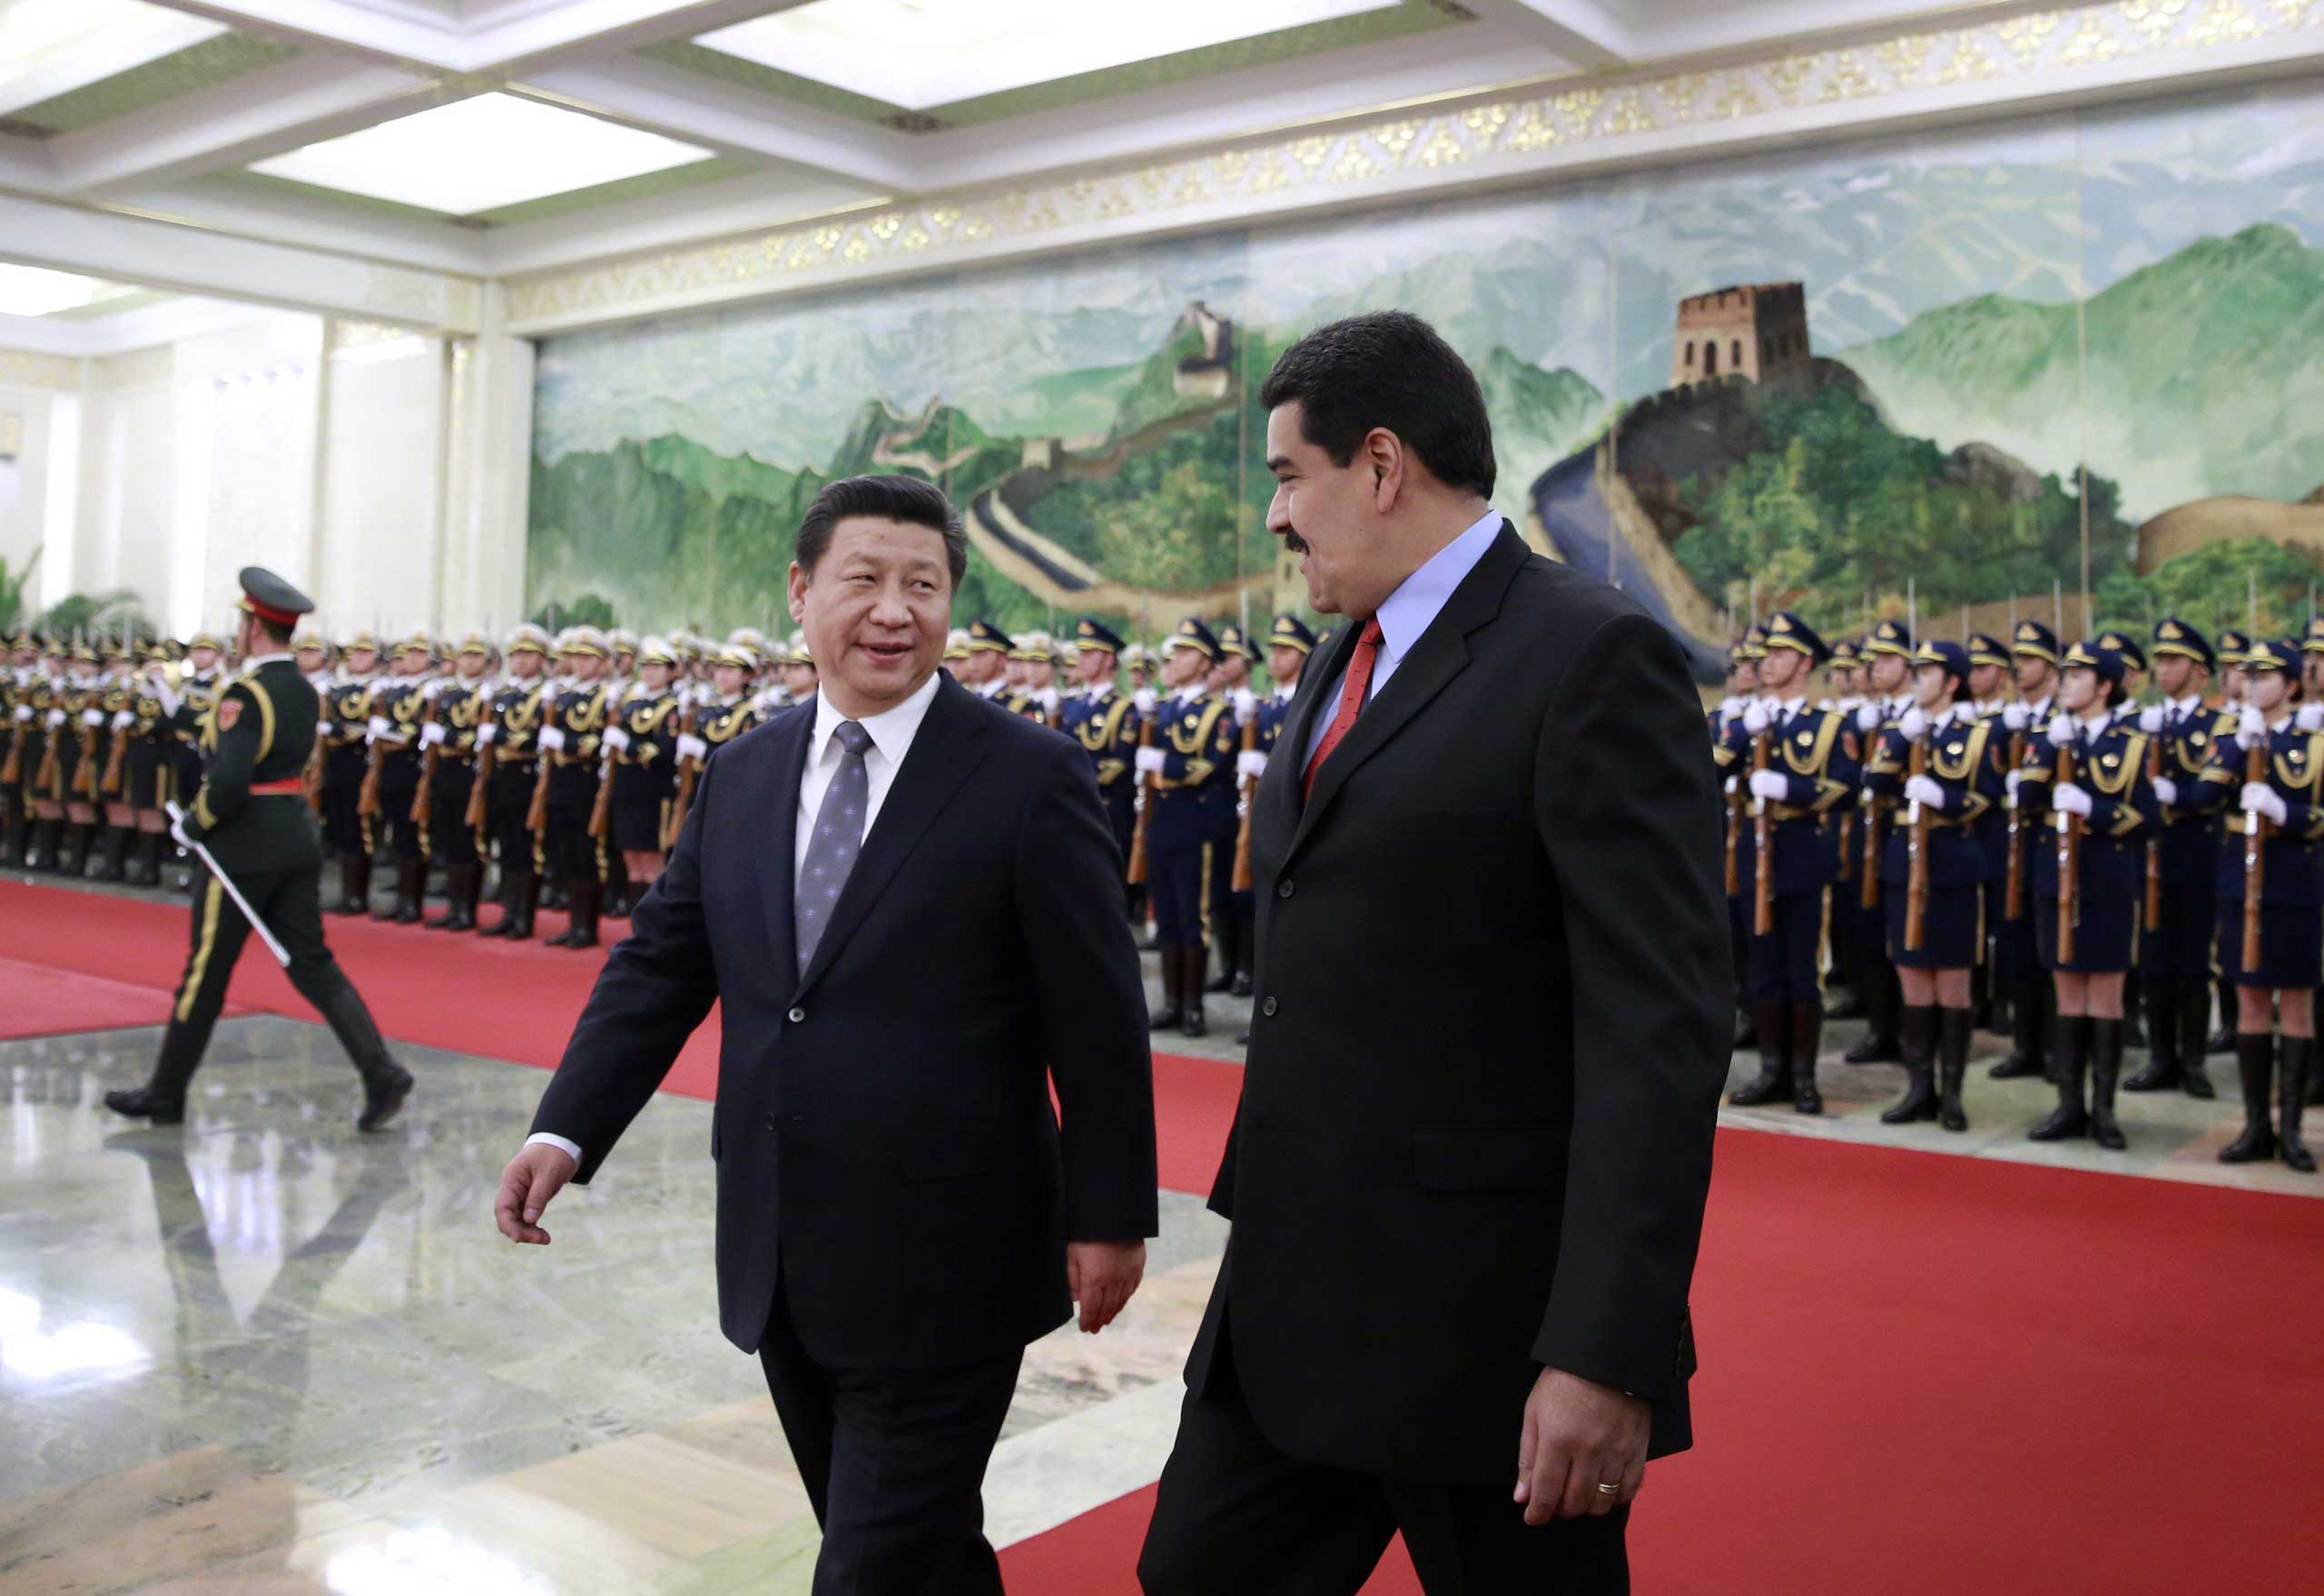 Venezuela's President Nicolas Maduro and Chinese President Xi Jinping chat after reviewing an honor guard during a welcome ceremony at the Great Hall of the People in Beijing on Jan. 7, 2015. (Andy Wong—AFP/Getty Images)